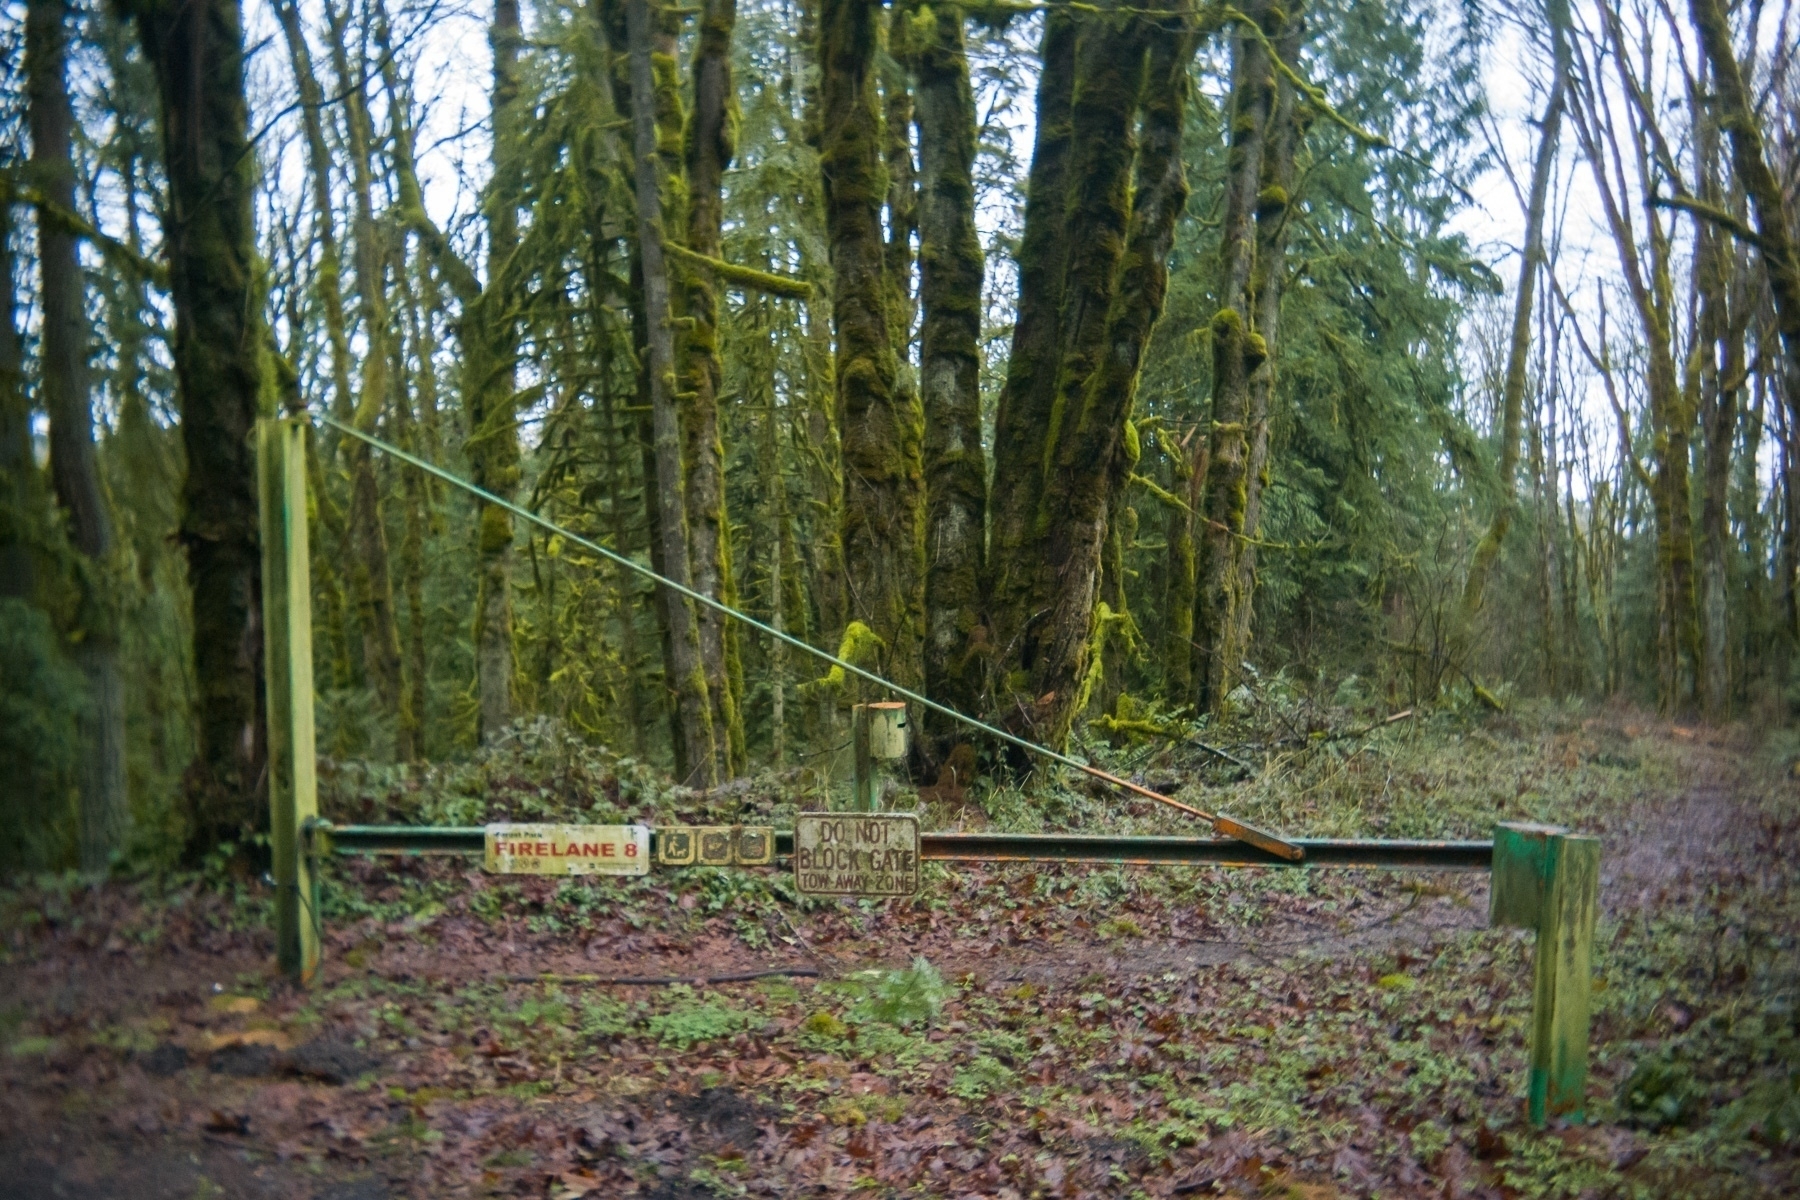 A muddy lane blocked off by a barrier that says Firelane 8 with a number of mossy tree trunks visible on the side of its path.